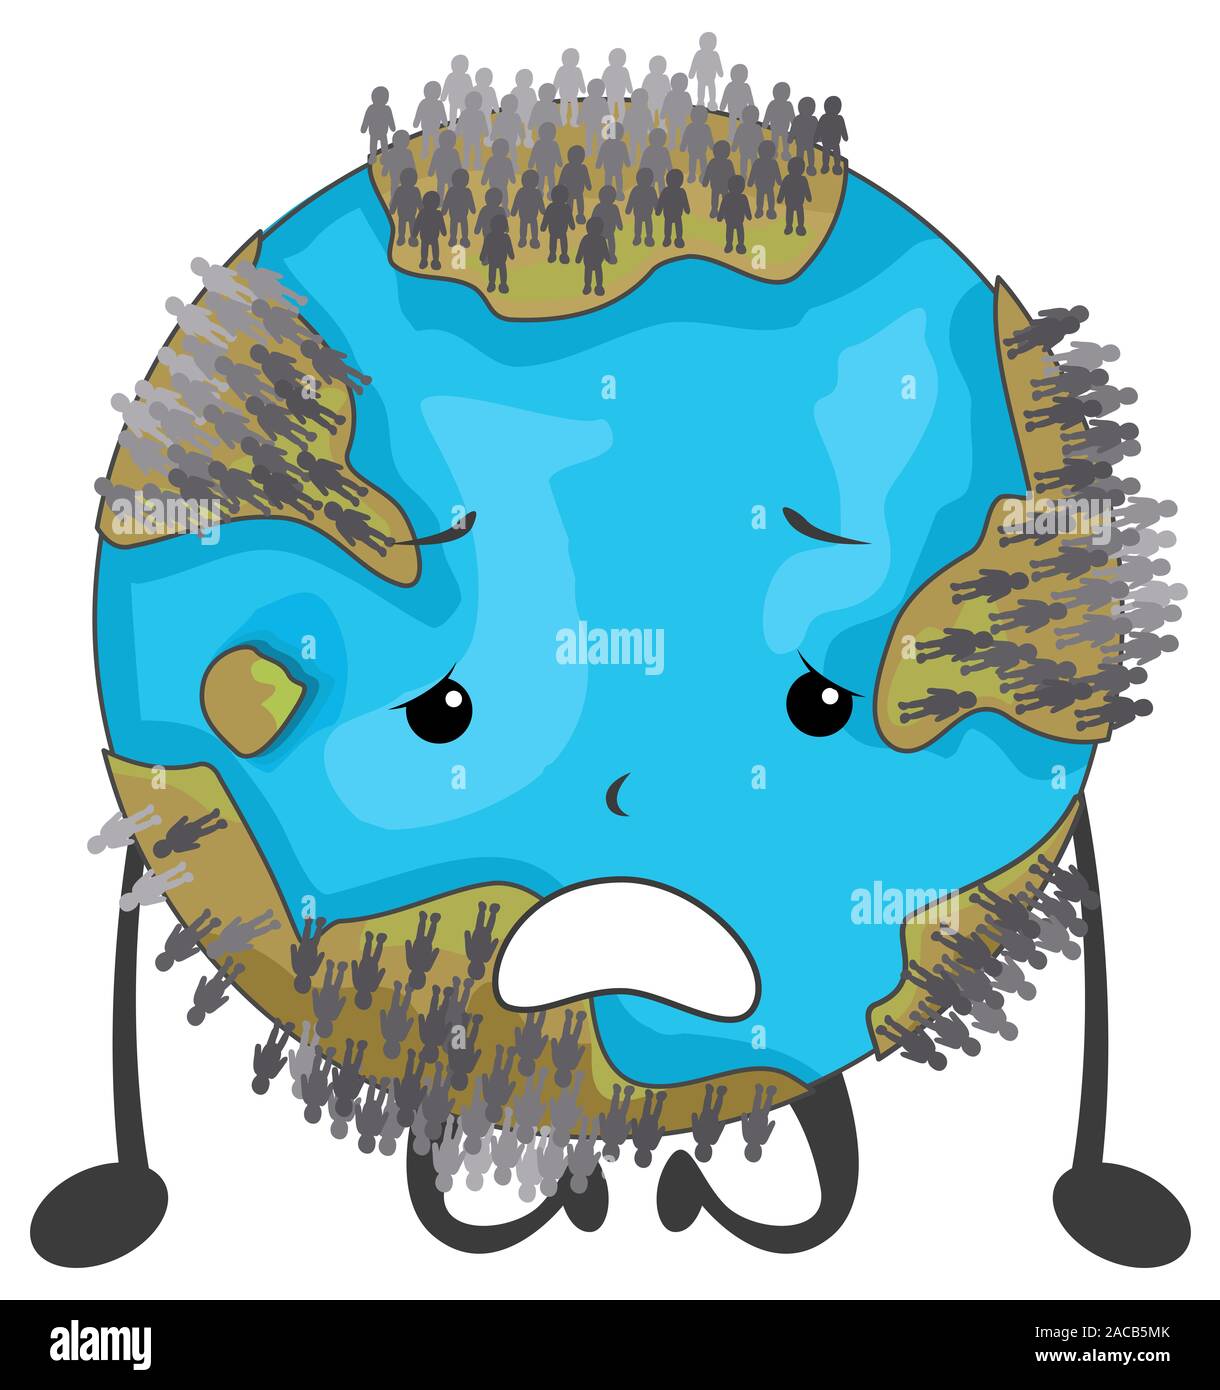 Illustration of a Sad Earth Mascot Full of People. Over Population Stock Photo